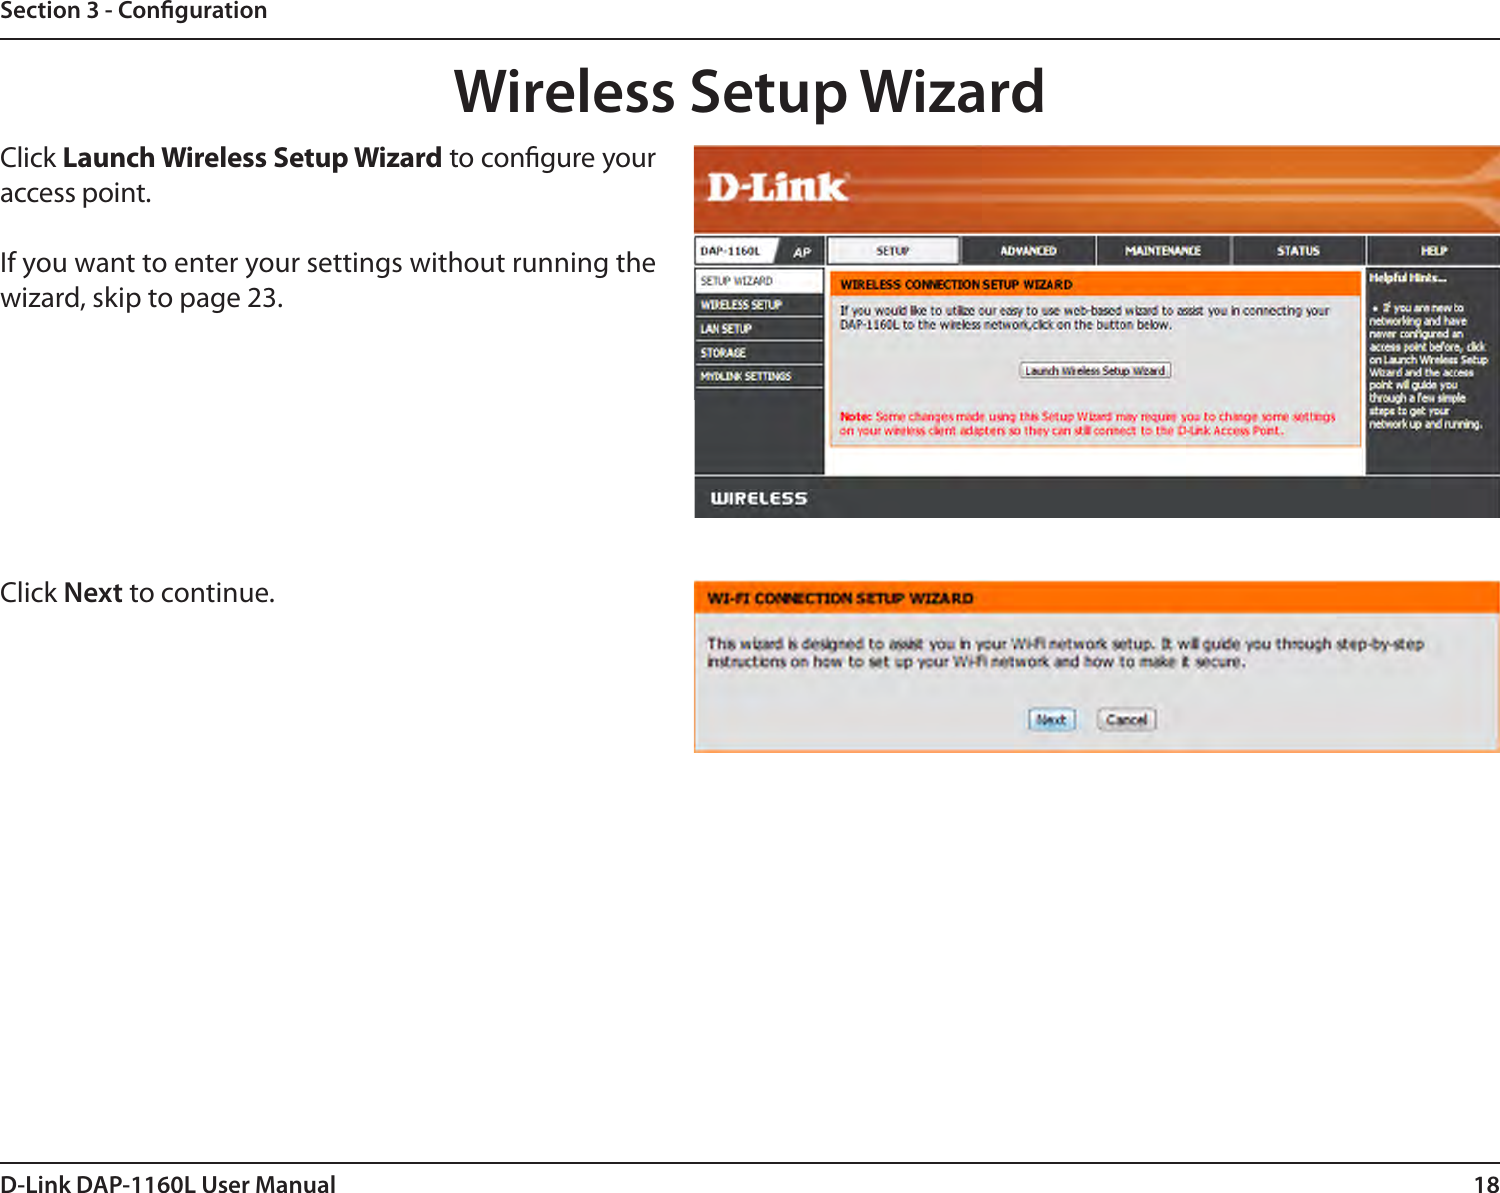 18D-Link DAP-1160L User ManualSection 3 - CongurationClick Launch Wireless Setup Wizard to congure your access point.If you want to enter your settings without running the wizard, skip to page 23.Wireless Setup WizardClick Next to continue. 